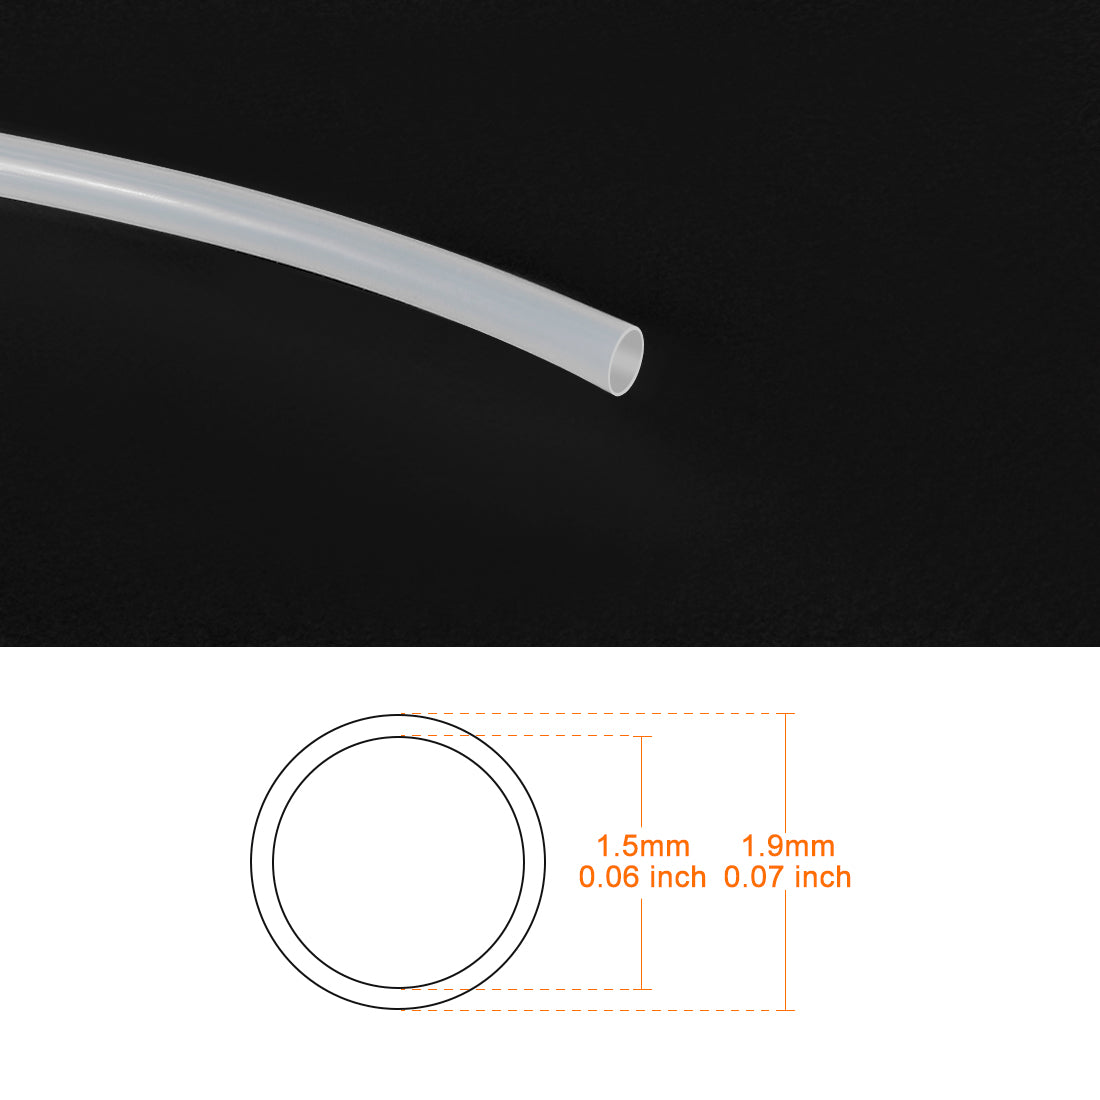 uxcell Uxcell PTFE Tube Tubing 1 Meter 3.28ft Lengh Pipe 1.5mm ID 1.9mm OD for 3D Printer RepRap